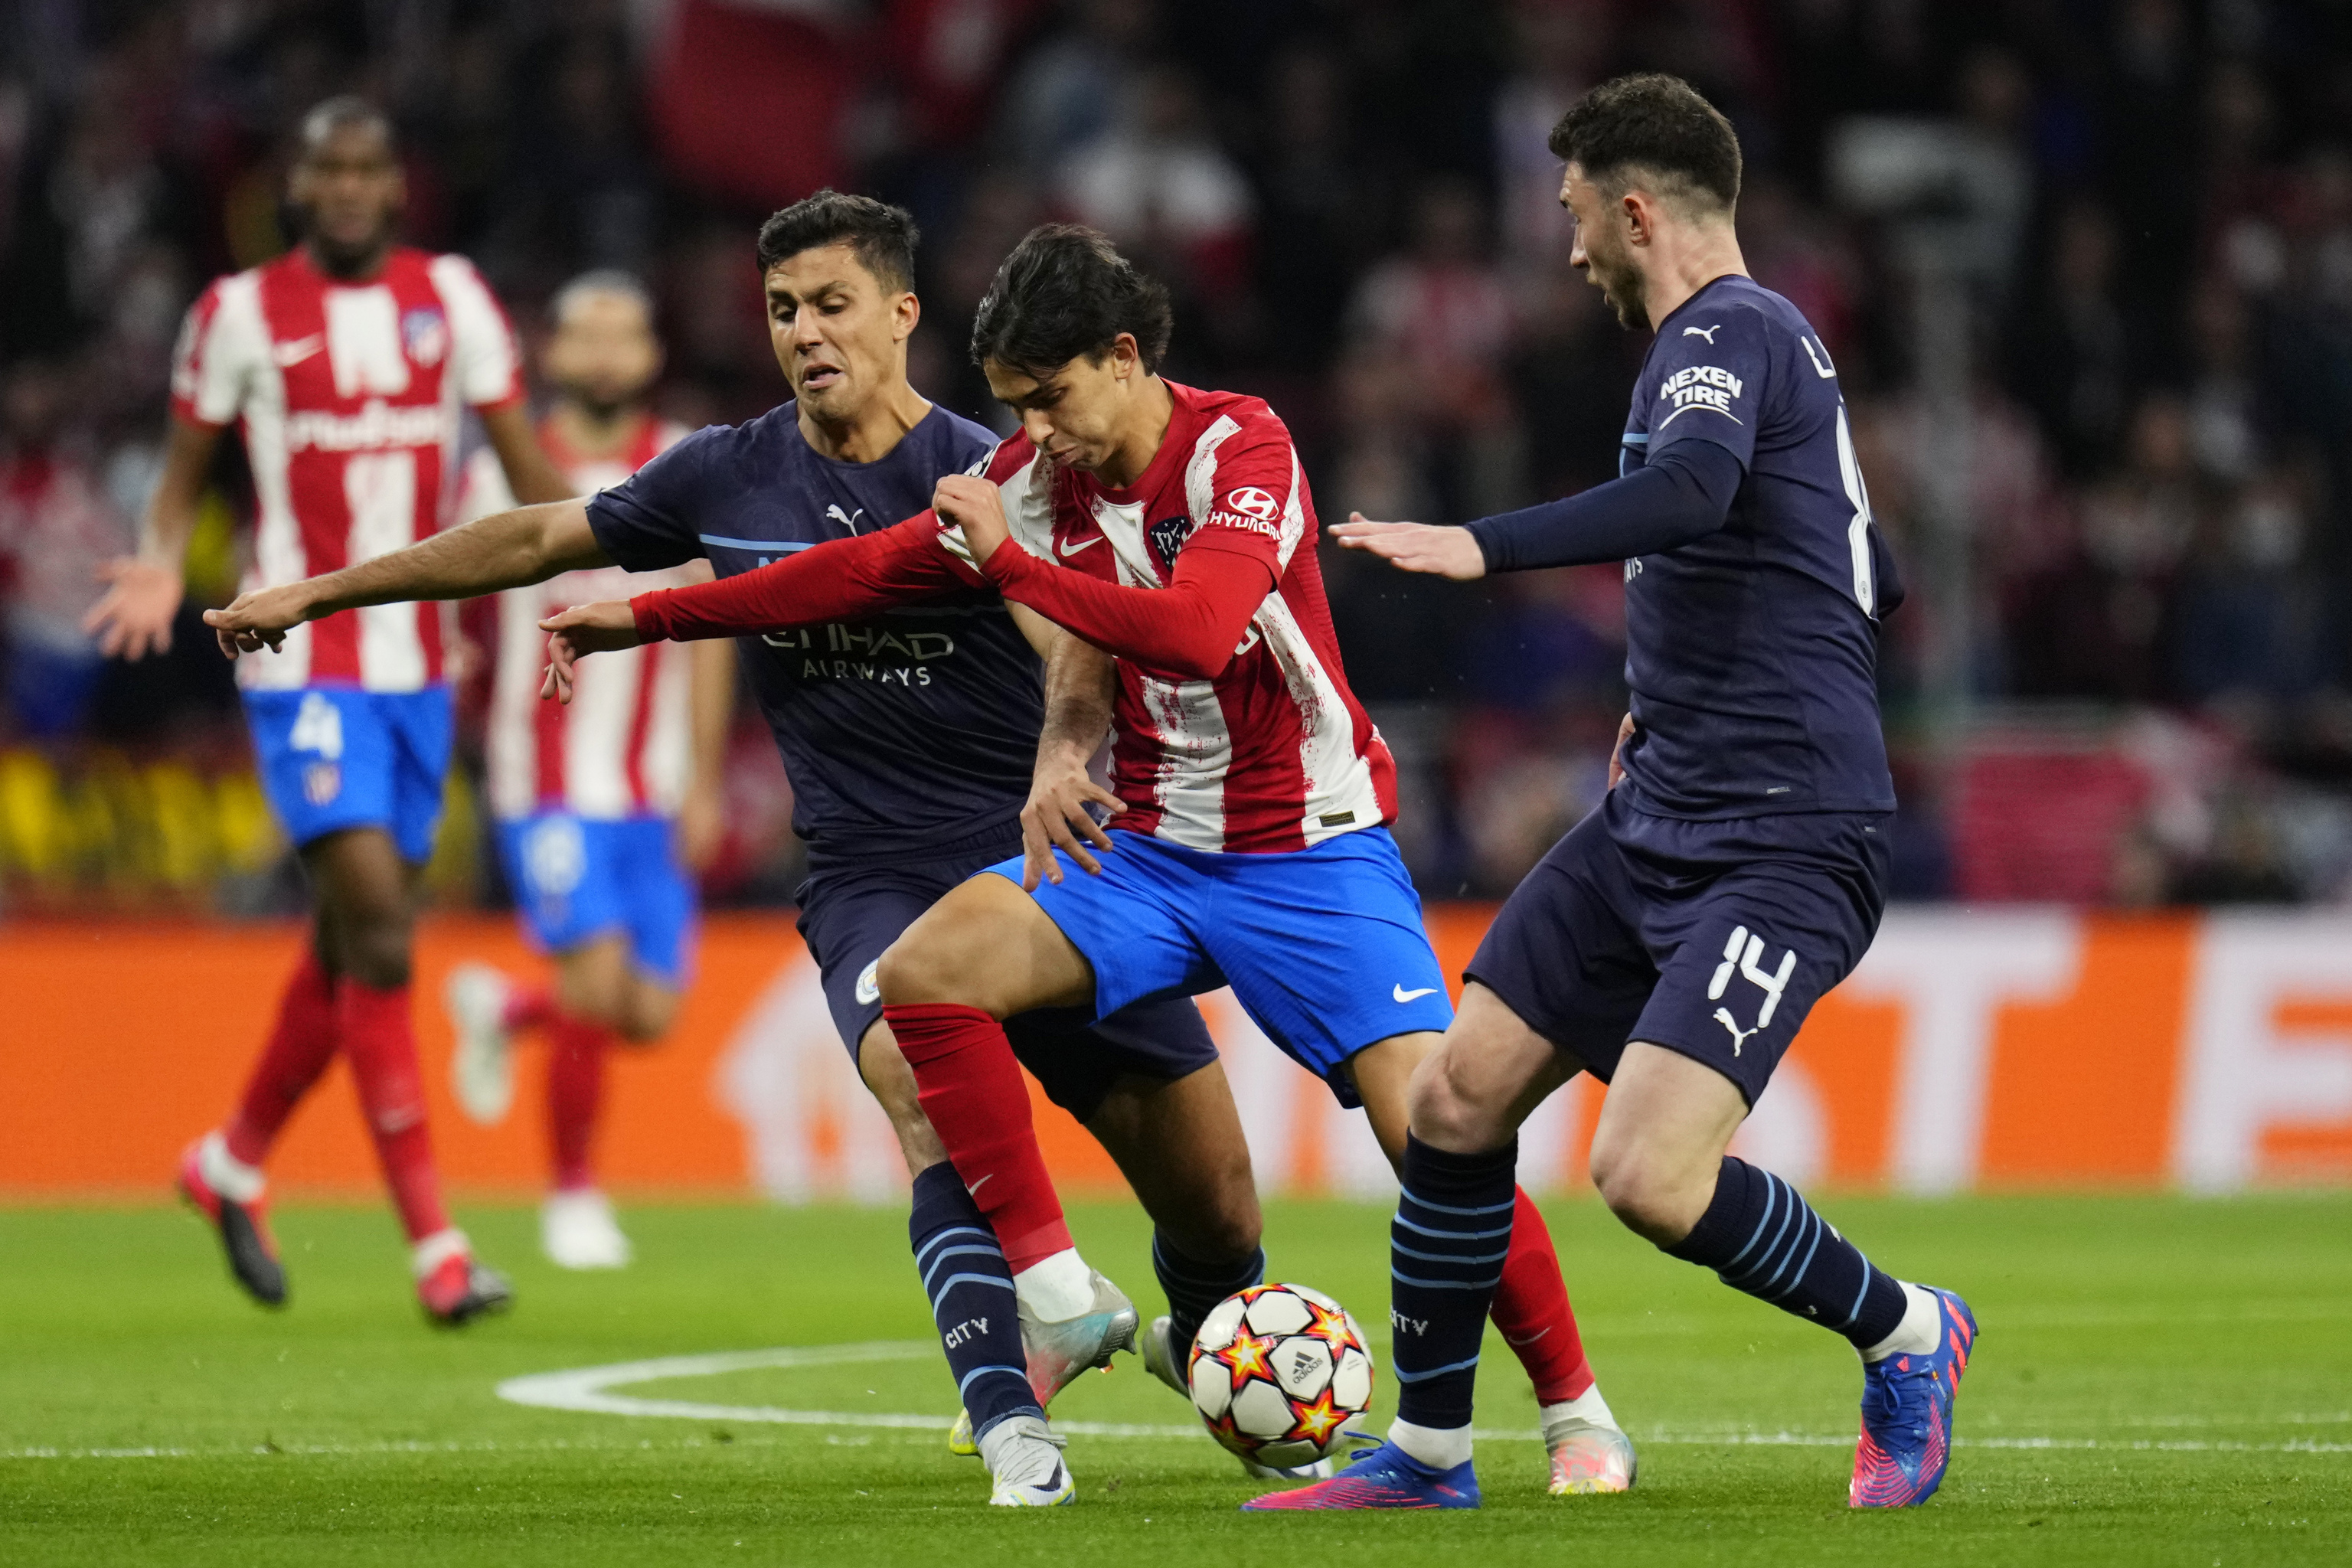 Manchester City's Rodrigo, left, and Manchester City's Aymeric Laporte, right, challenge Atletico Madrid's  lt;HIT gt;Joao lt;/HIT gt;  lt;HIT gt;Felix lt;/HIT gt; during the Champions League quarterfinal second leg soccer match between Atletico Madrid and Manchester City at Wanda Metropolitano stadium in Madrid, Spain, Wednesday, April 13, 2022. (AP Photo/Manu Fernandez)